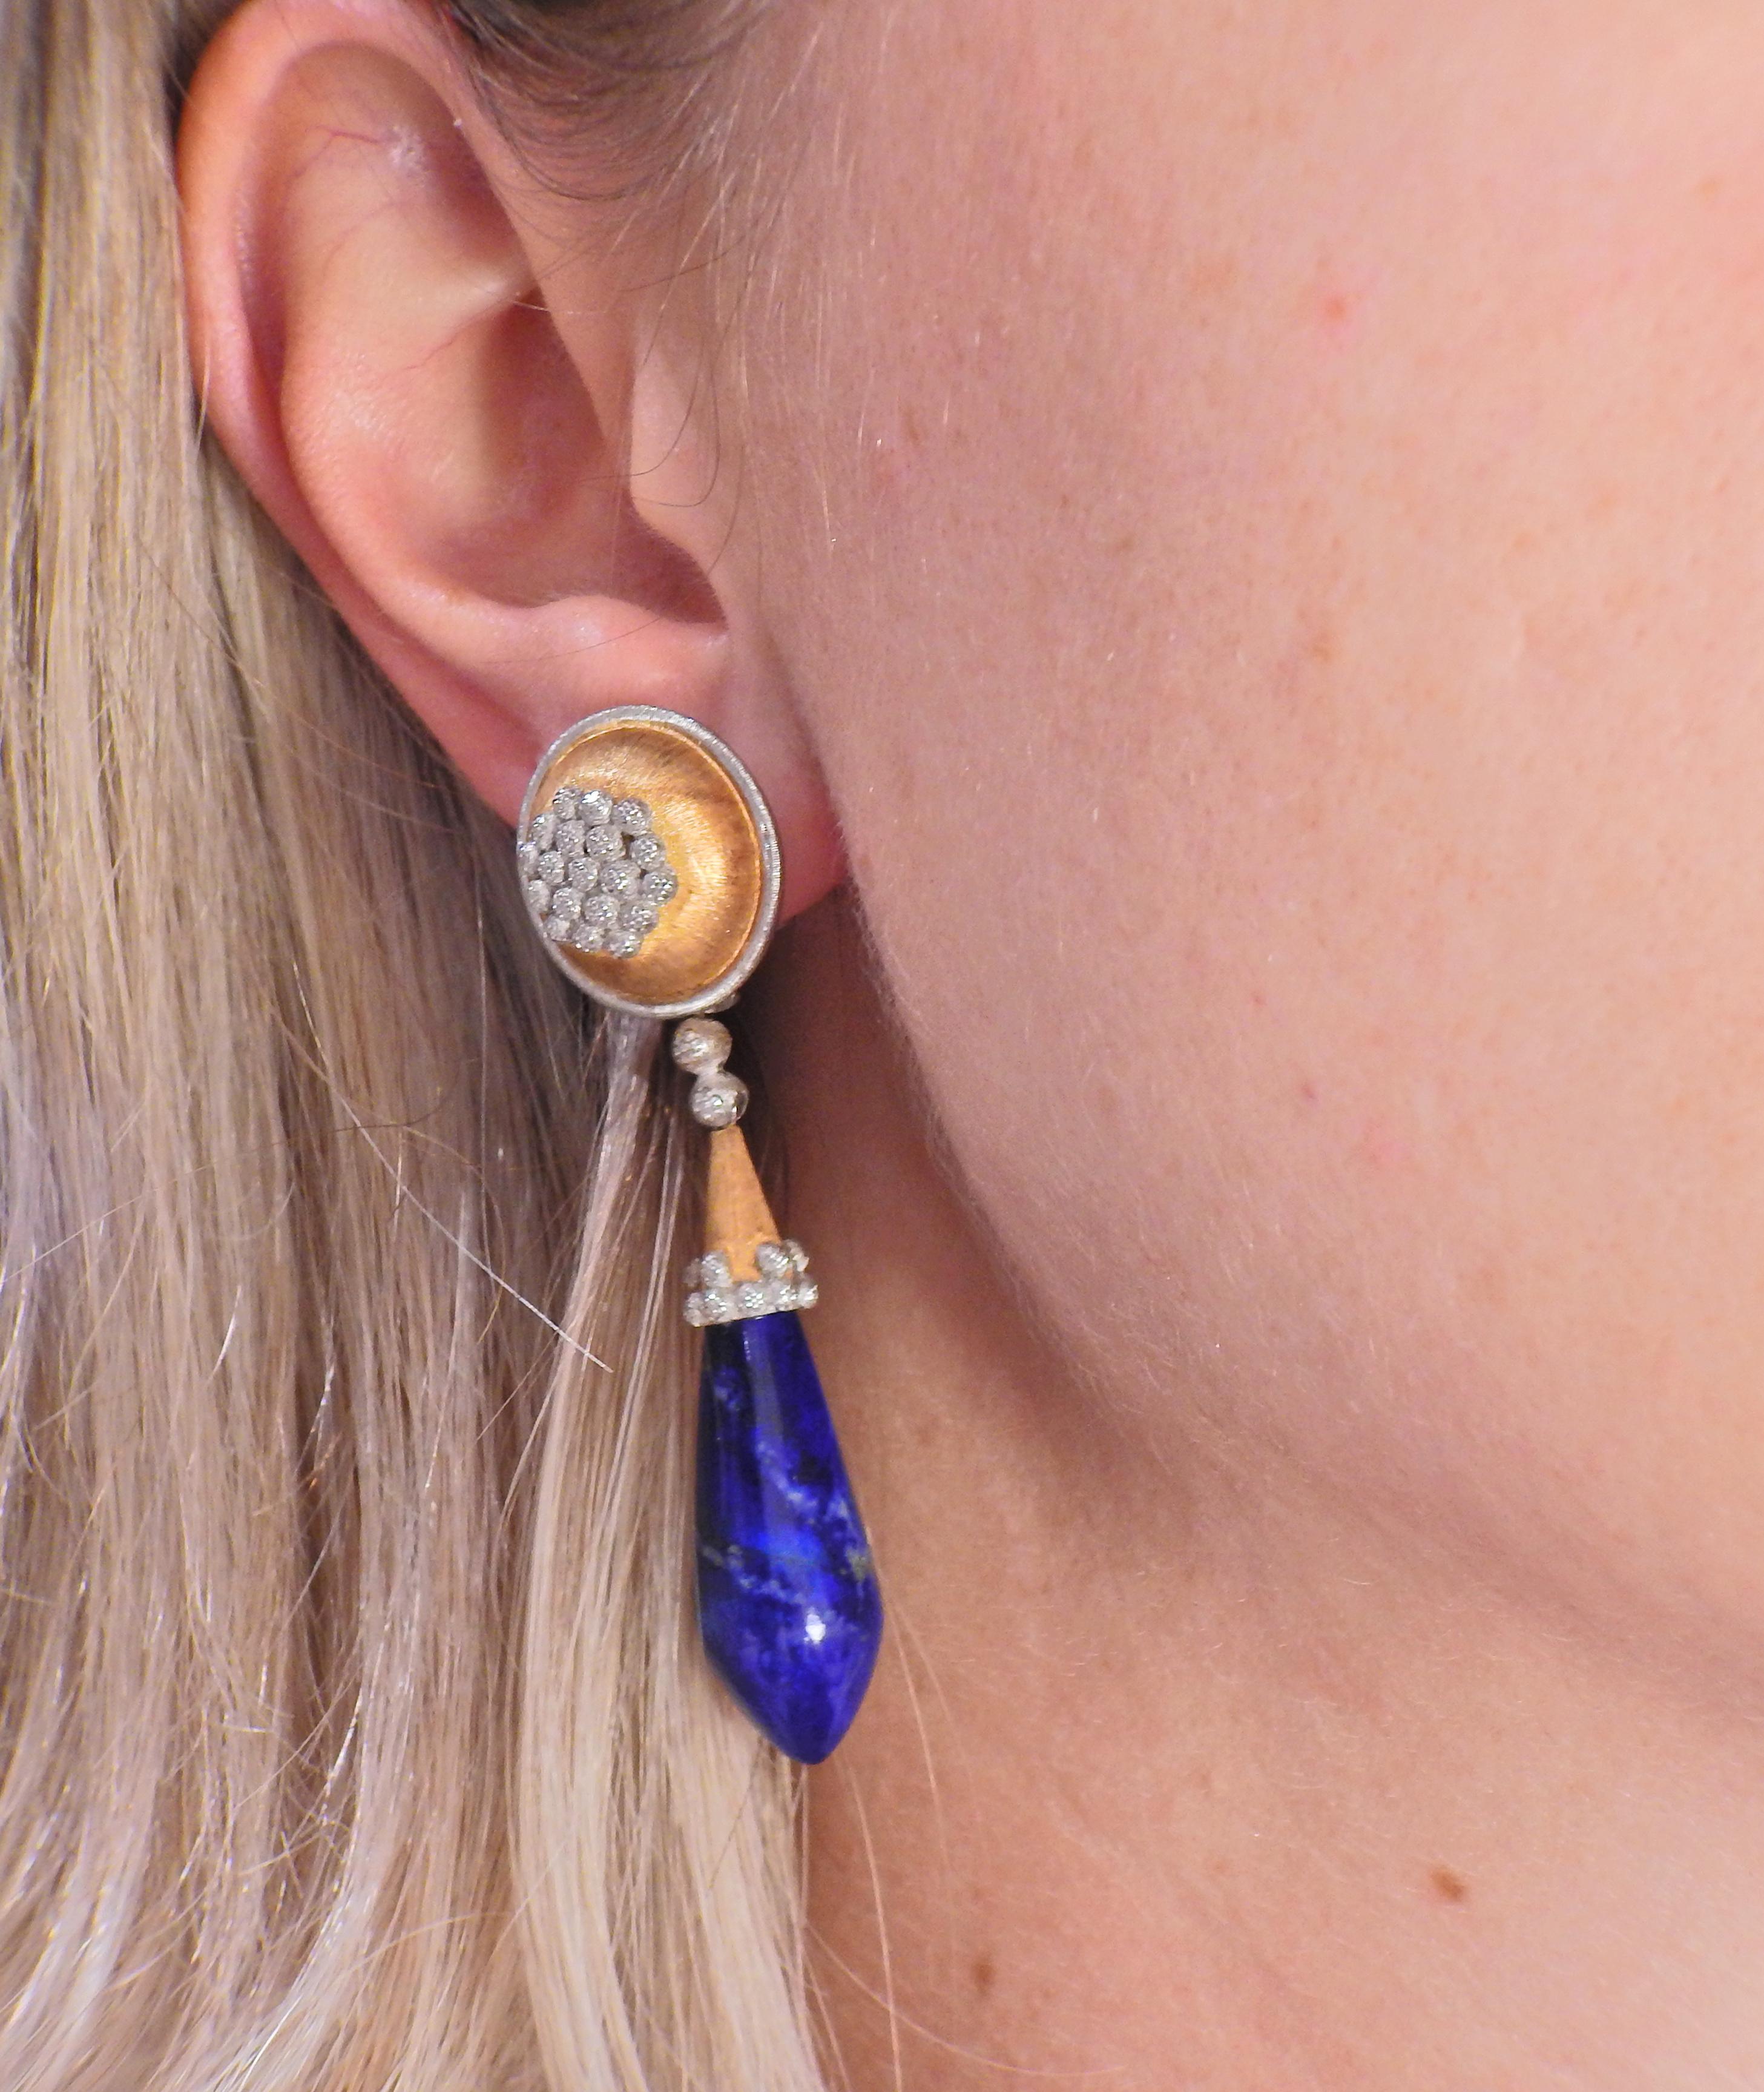 Pair of 18k white and yellow gold earrings by Mario Buccellati, with lapis lazuli drops. Earrings are 60mm long, top is 18mm in diameter. Marked: M. Buccellati, 750, Italian mark. Weight - 31.5 grams.